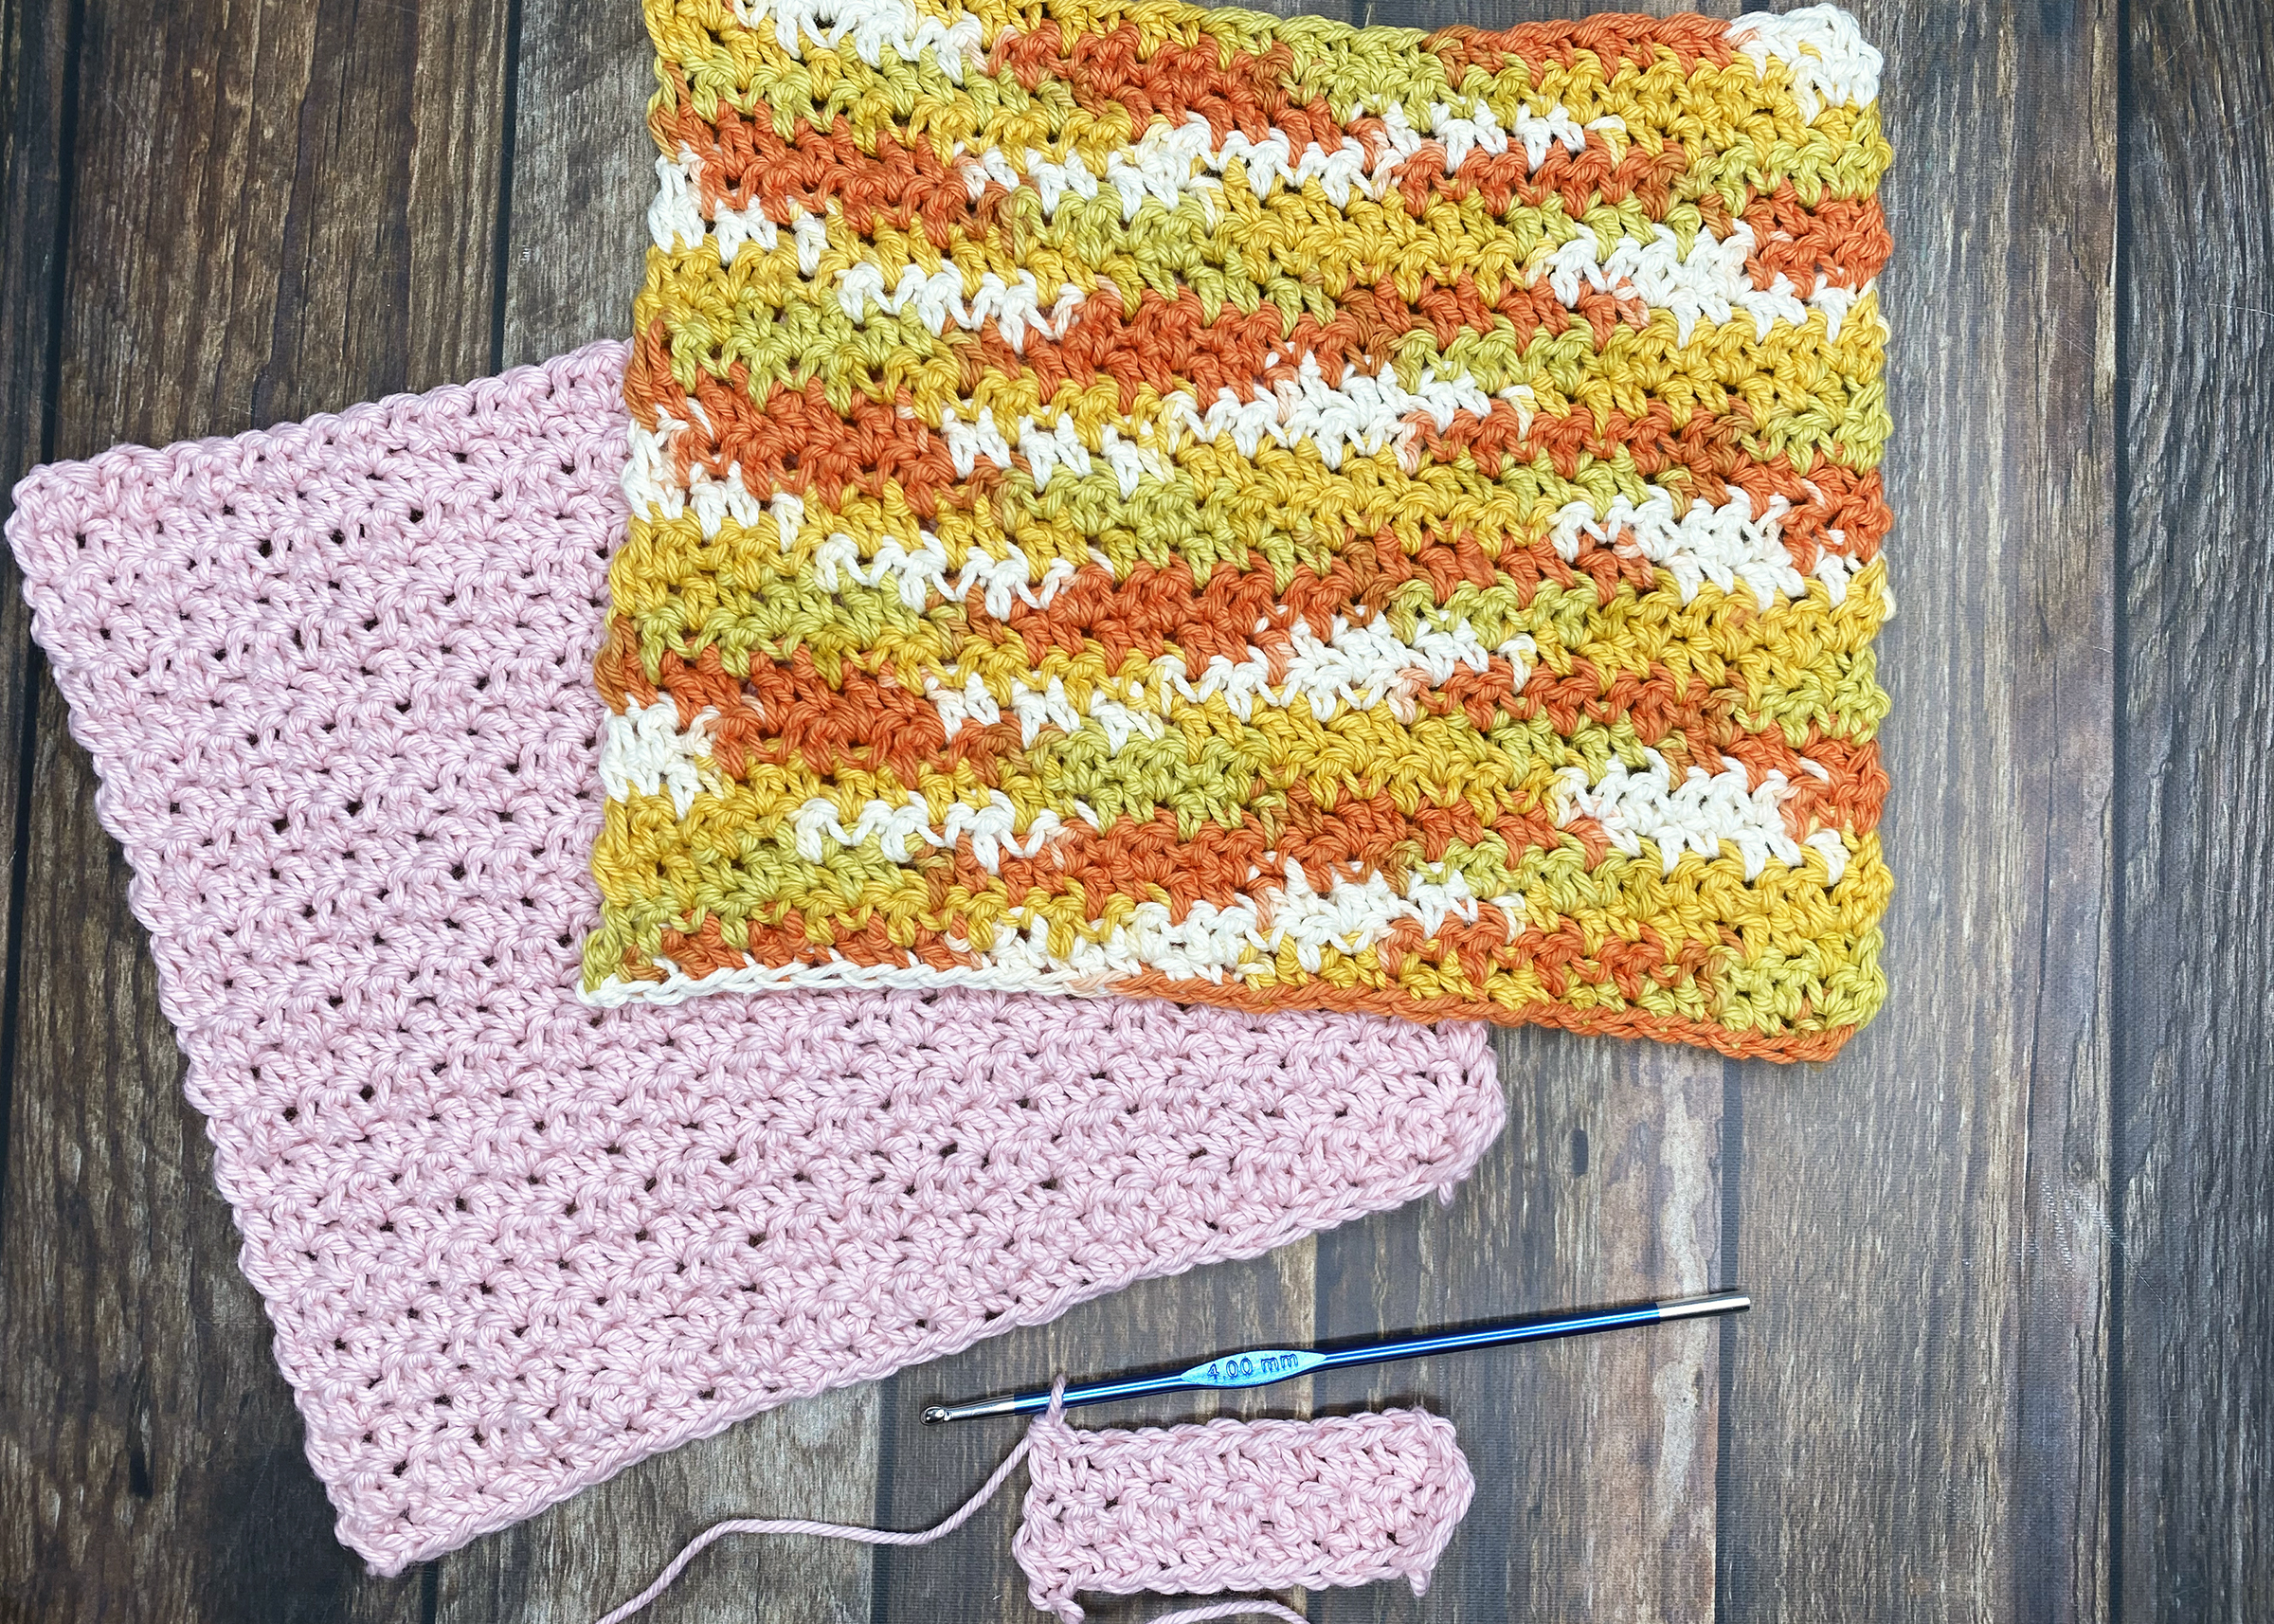 image of a tri-color crochet square and a pink crochet square with a crochet hook